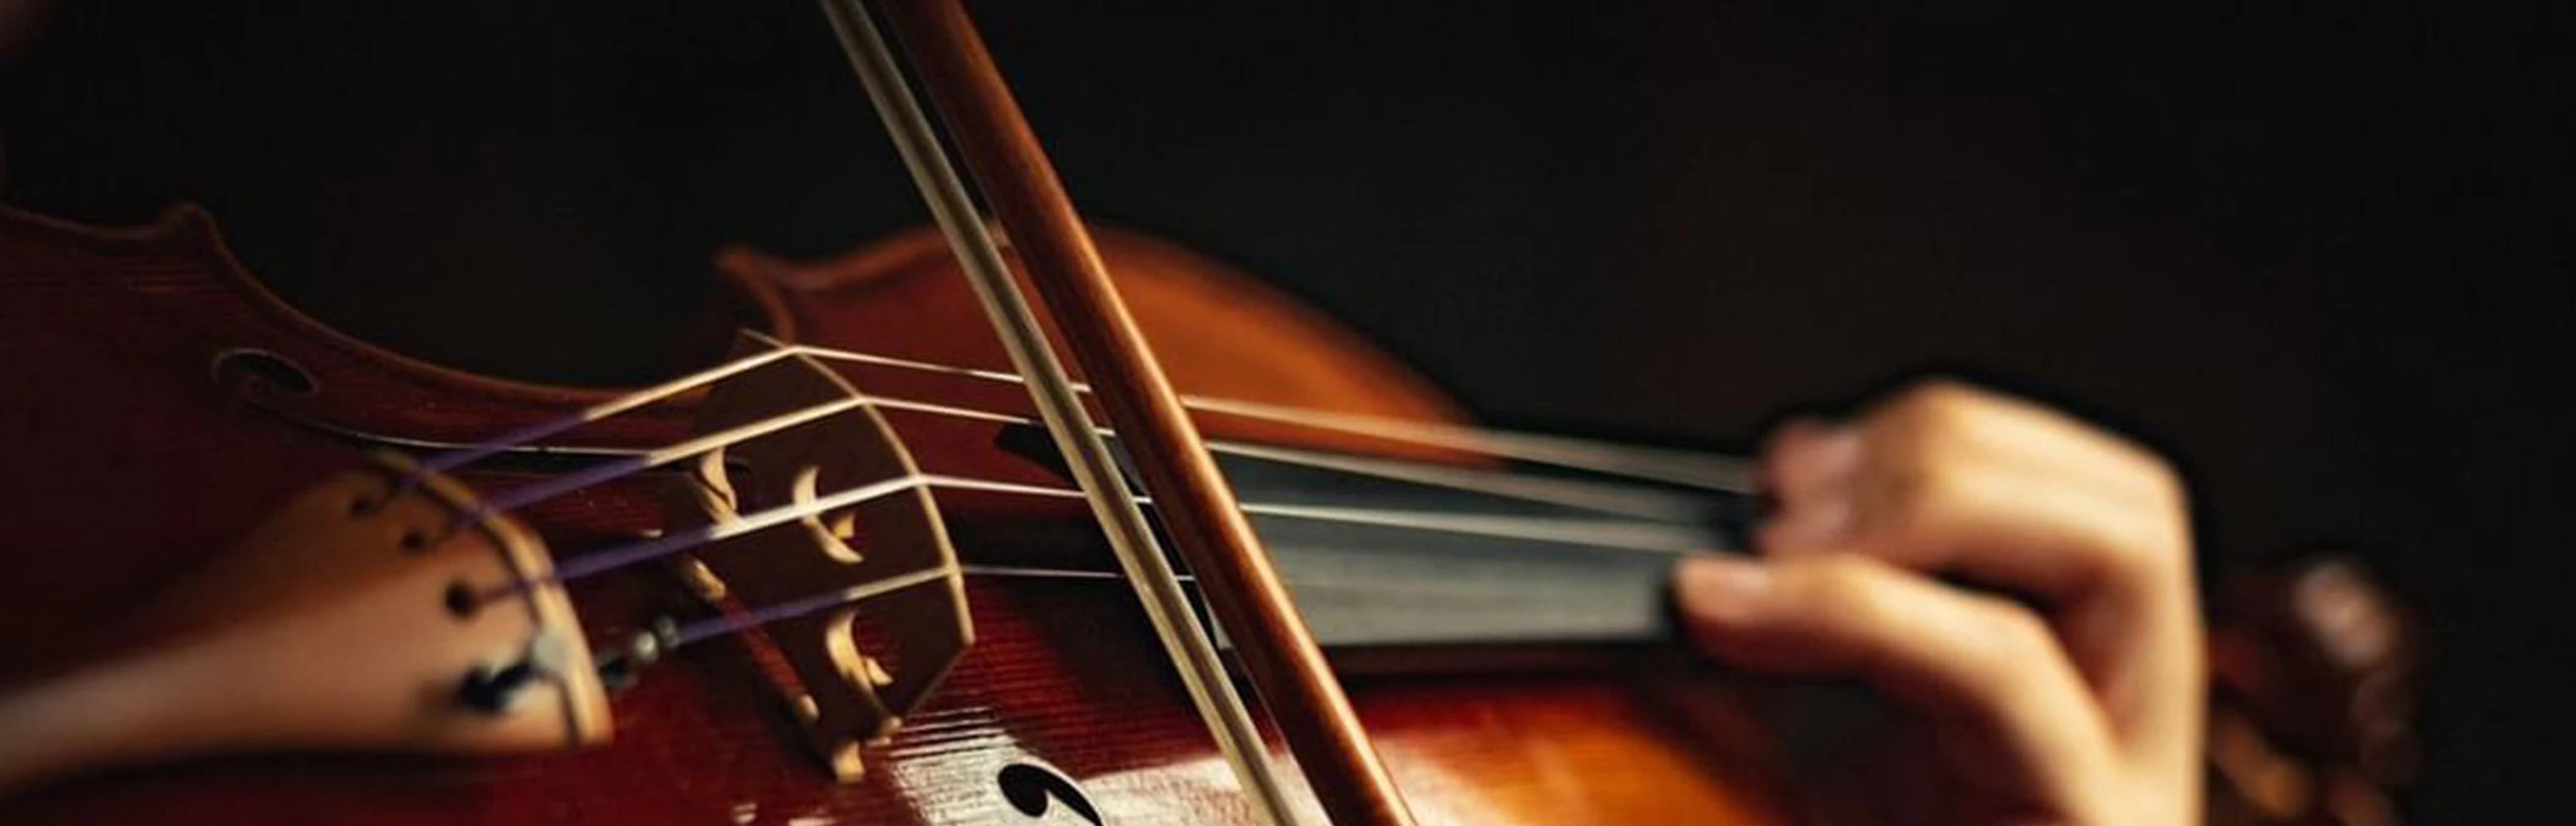 15% off all products from Holstein Violins